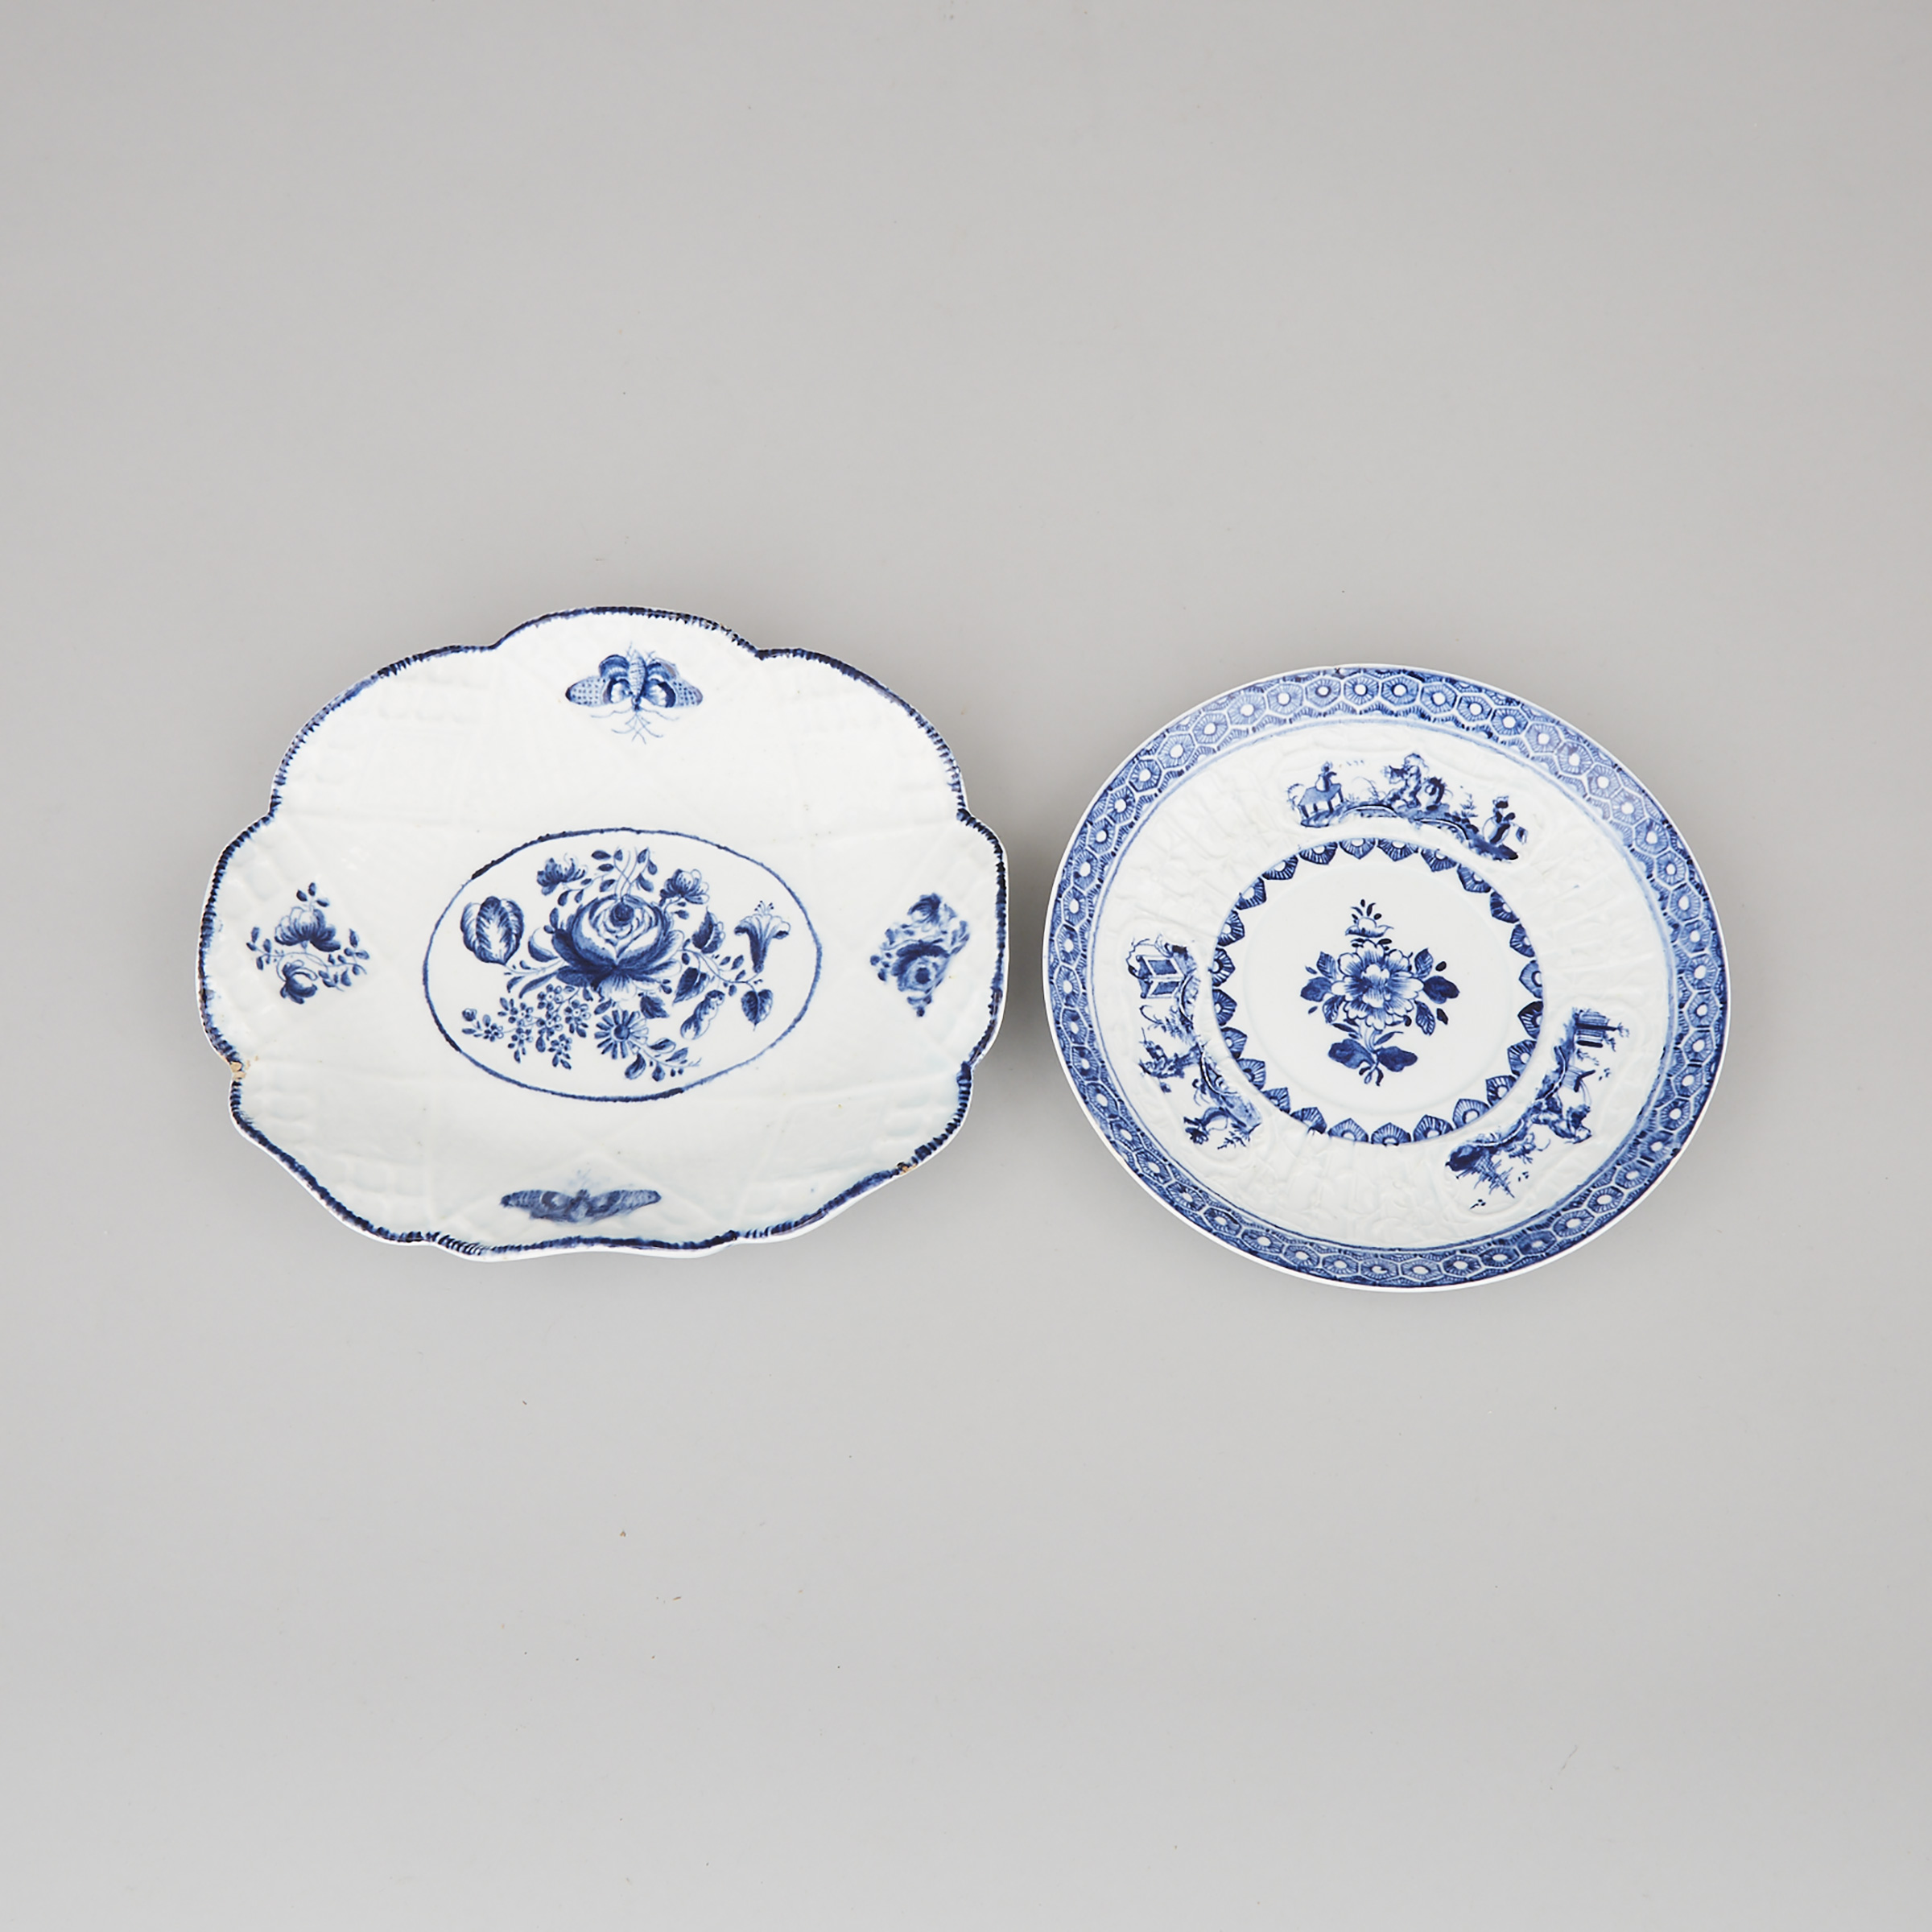 Two Bow Blue and White Moulded Dish Stands, c.1765